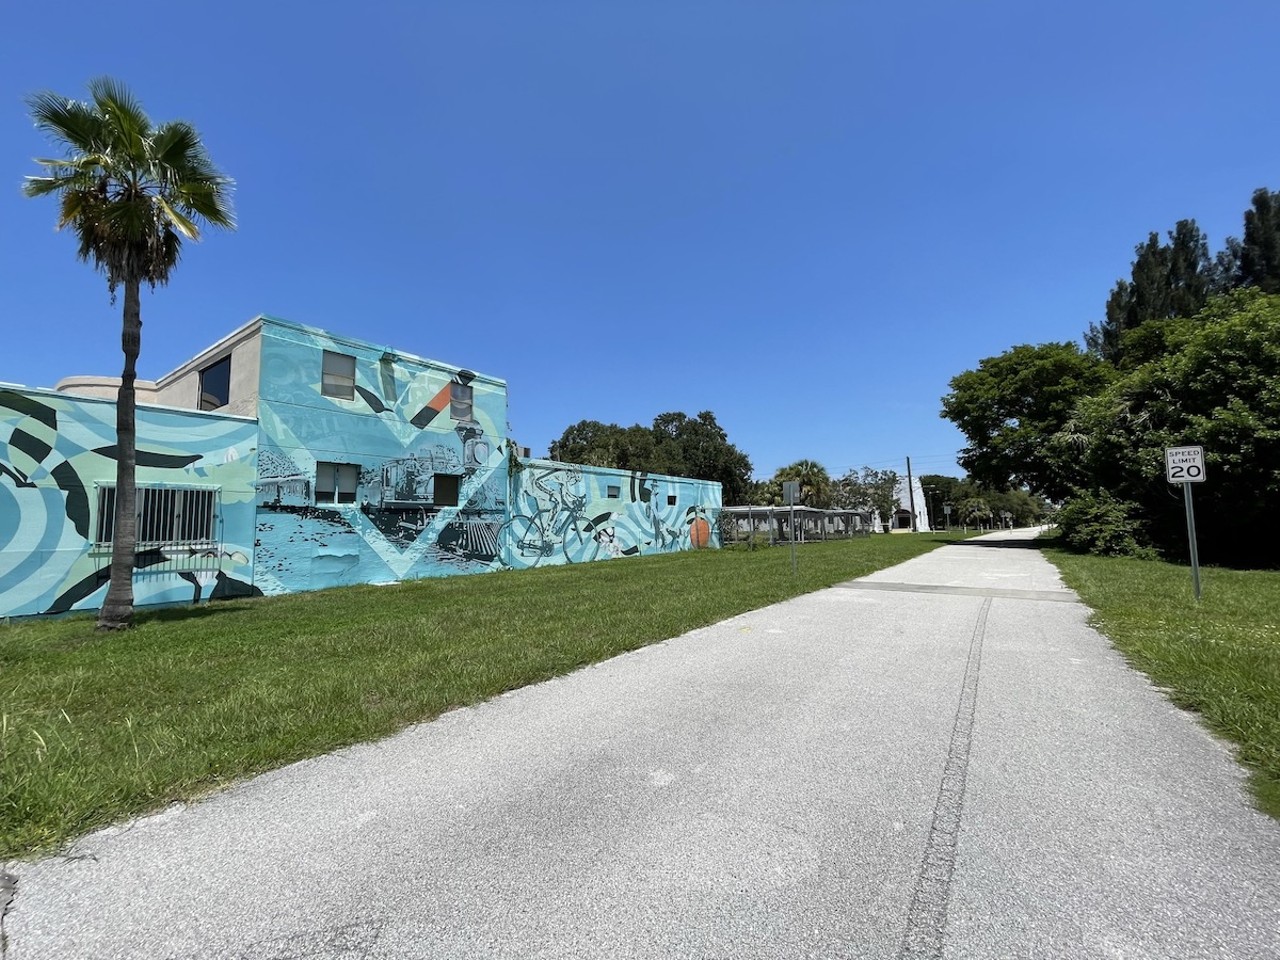 100 Years Before J. Cole tells the history of the Pinellas Trail in Downtown Clearwater
620 Drew St., Clearwater
You’ll find Tony Krol and Michelle Sawyer’s “100 Years Before J. Cole” alongside the Pinellas Trail, near where Drew Street intersects with North Garden Avenue.
The mural tells the history of the Pinellas Trail, once Peter Demen’s short-lived Orange Belt Railway. The Orange Belt provided a path for trains delivering Florida citrus, vegetables and passengers across central Florida before the Great Freeze in 1894-95. It became part of the Plant System in 1895, then Atlantic Coast Line Railroad in 1902. The train delivered passengers up and down the east coast before Amtrack took over in 1971 and discontinued passenger service to Pinellas County in the early 1980s.
Bert Valery and then-County Administrator Fred Marquis launched plans to convert the extinct railway to a bike trail after a car struck and killed Valery’s son while riding his bike down Belleair Causeway in 1983. The first stretch of trail opened in 1990.
Nearly 30 years later, in 2018, Krol and Sawyer told the tale in paint. View “100 Years Before J. Cole” through the ARTours Clearwater app and watch that history come to life.Photo by Jennifer Ring